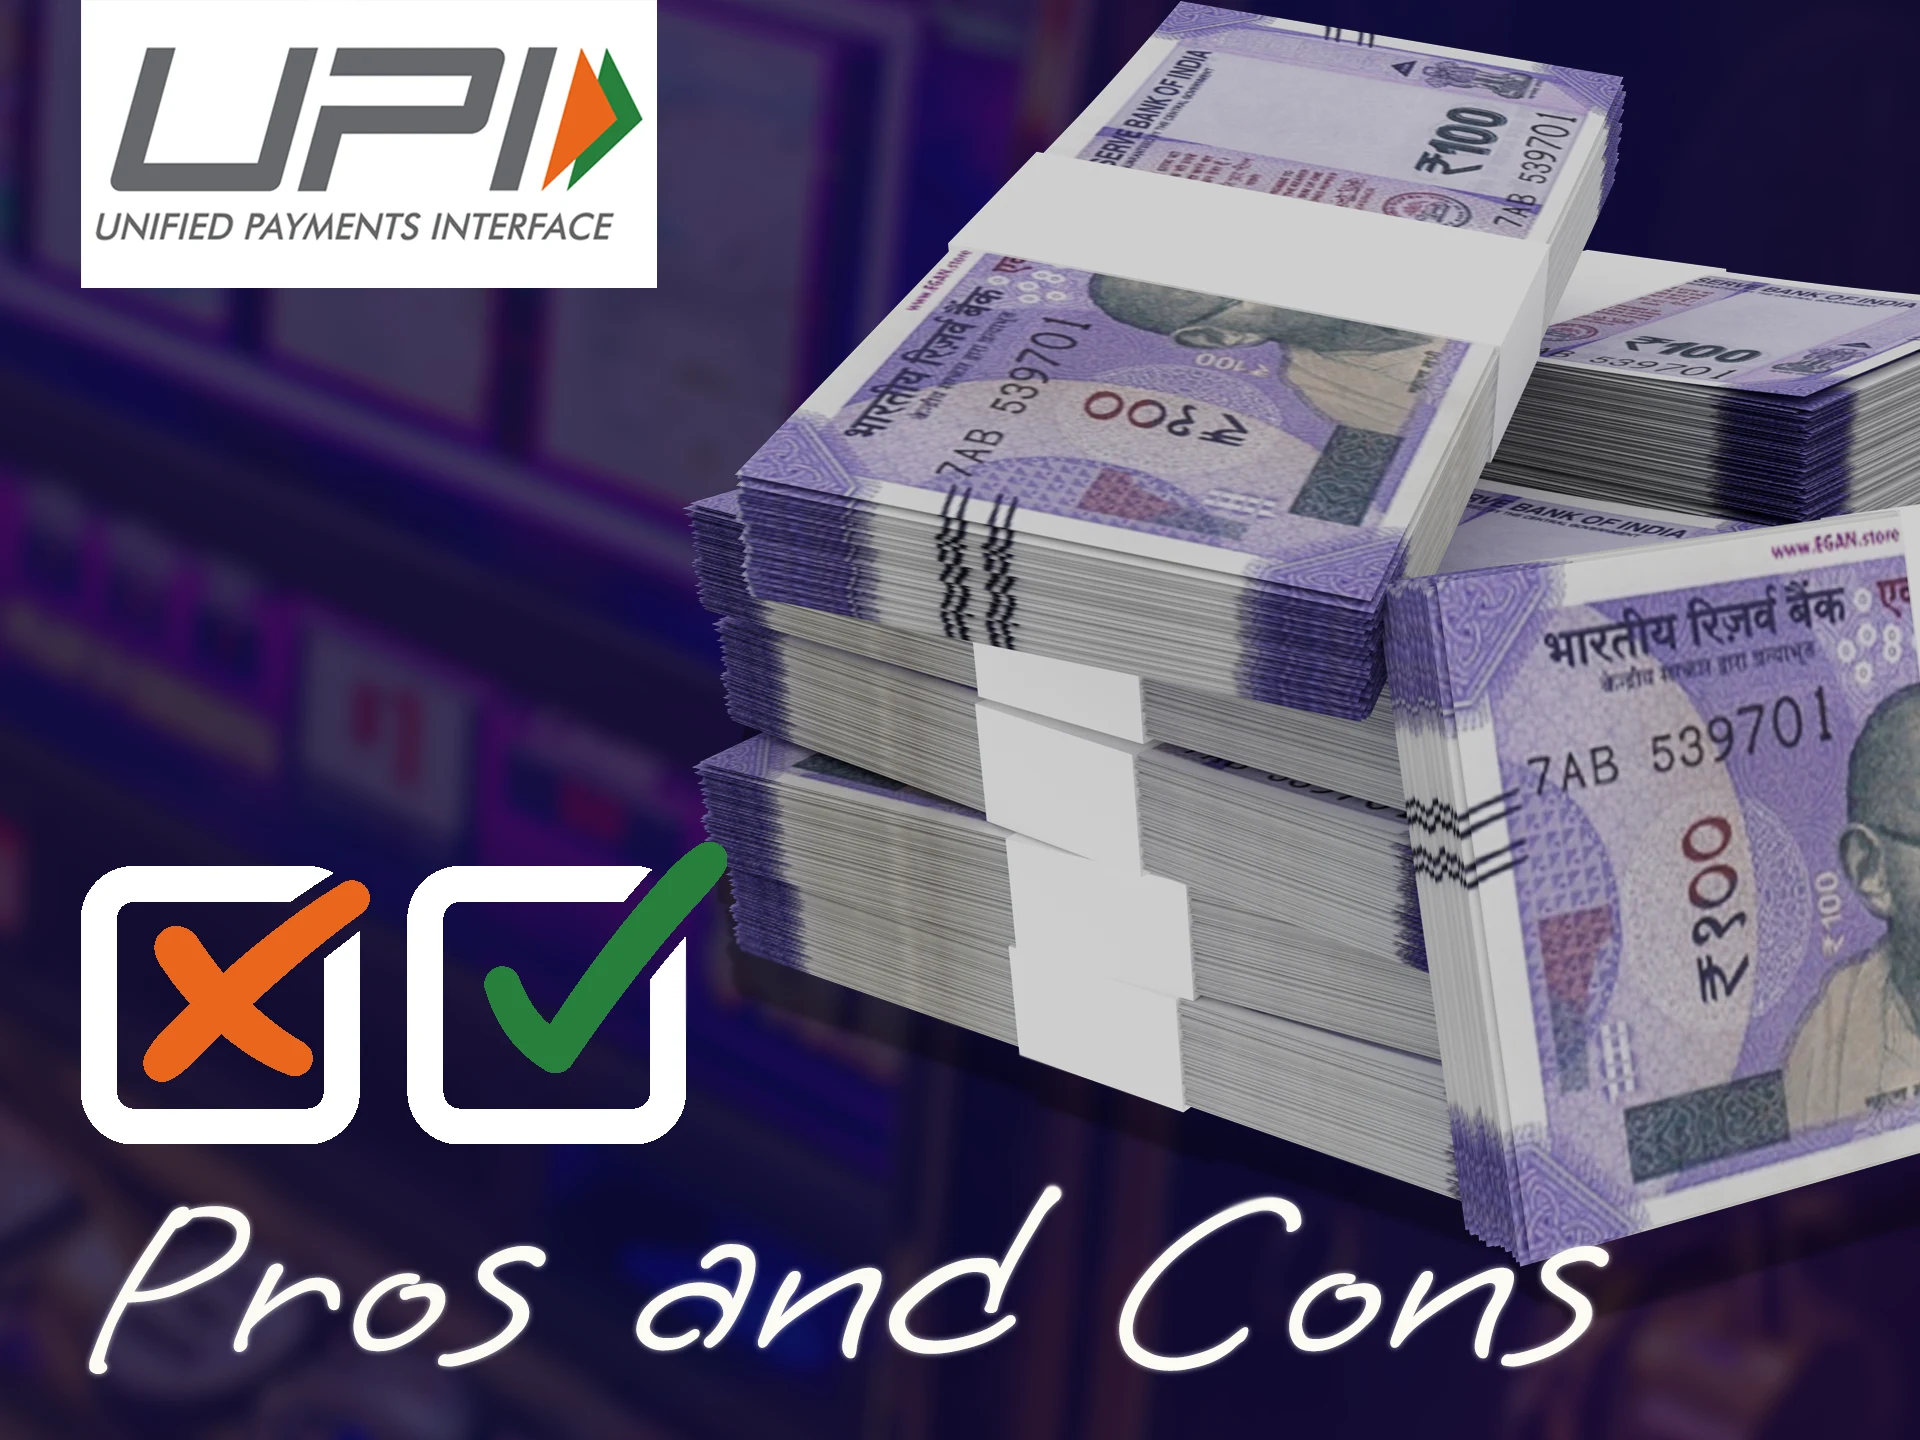 Familiarise yourself with the pros and cons of the UPI payment system.